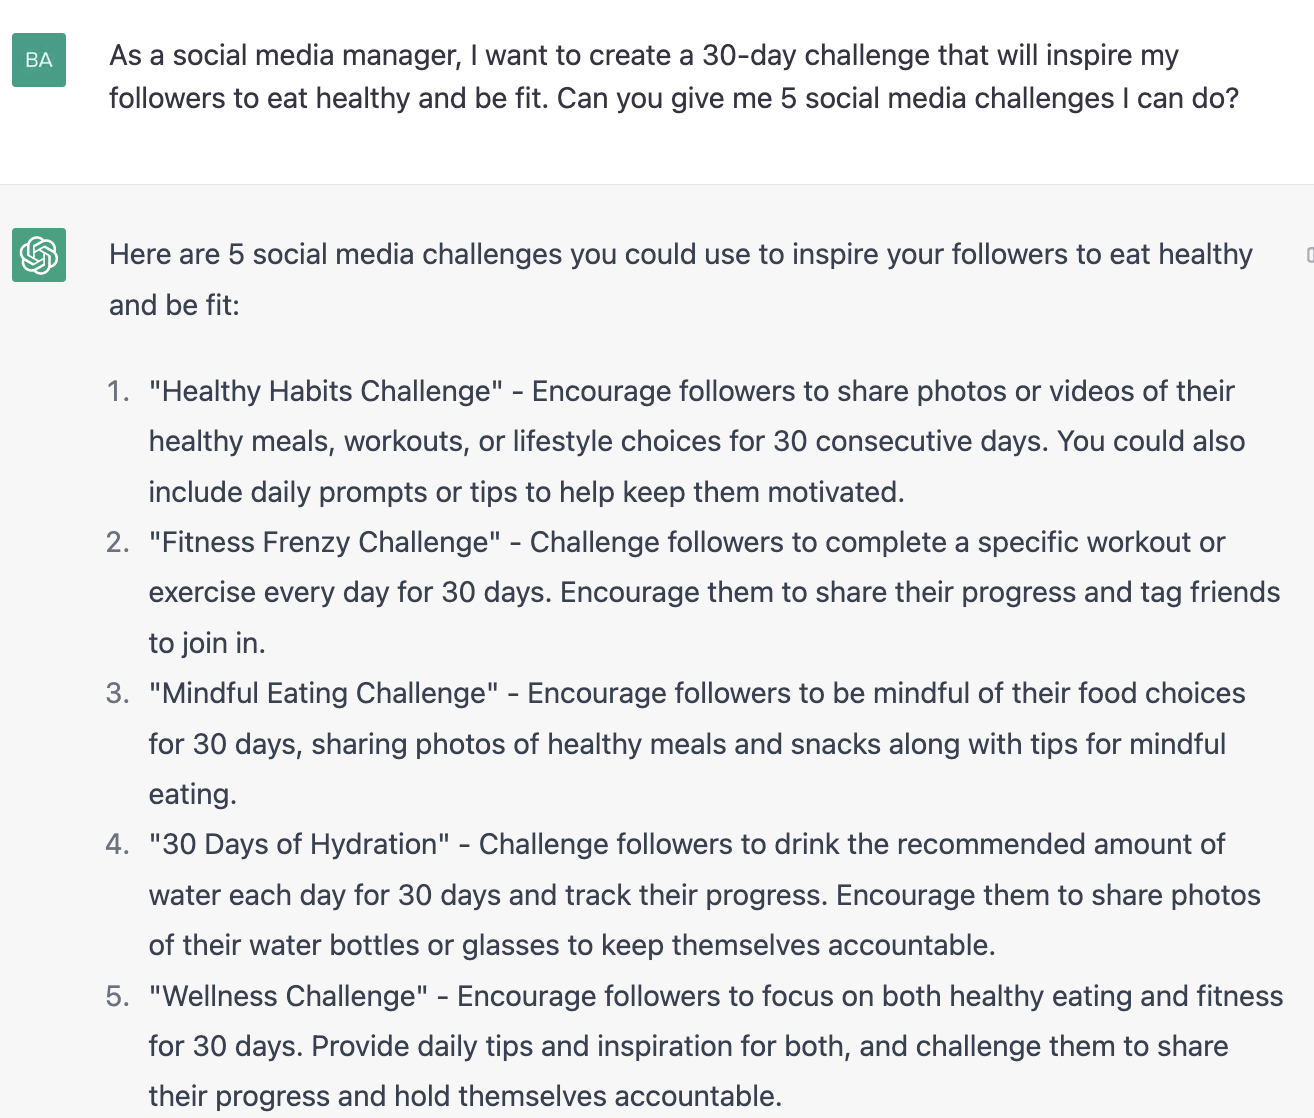 ChatGPT prompt about creating a 30 day challenge to eat healthy and be fit